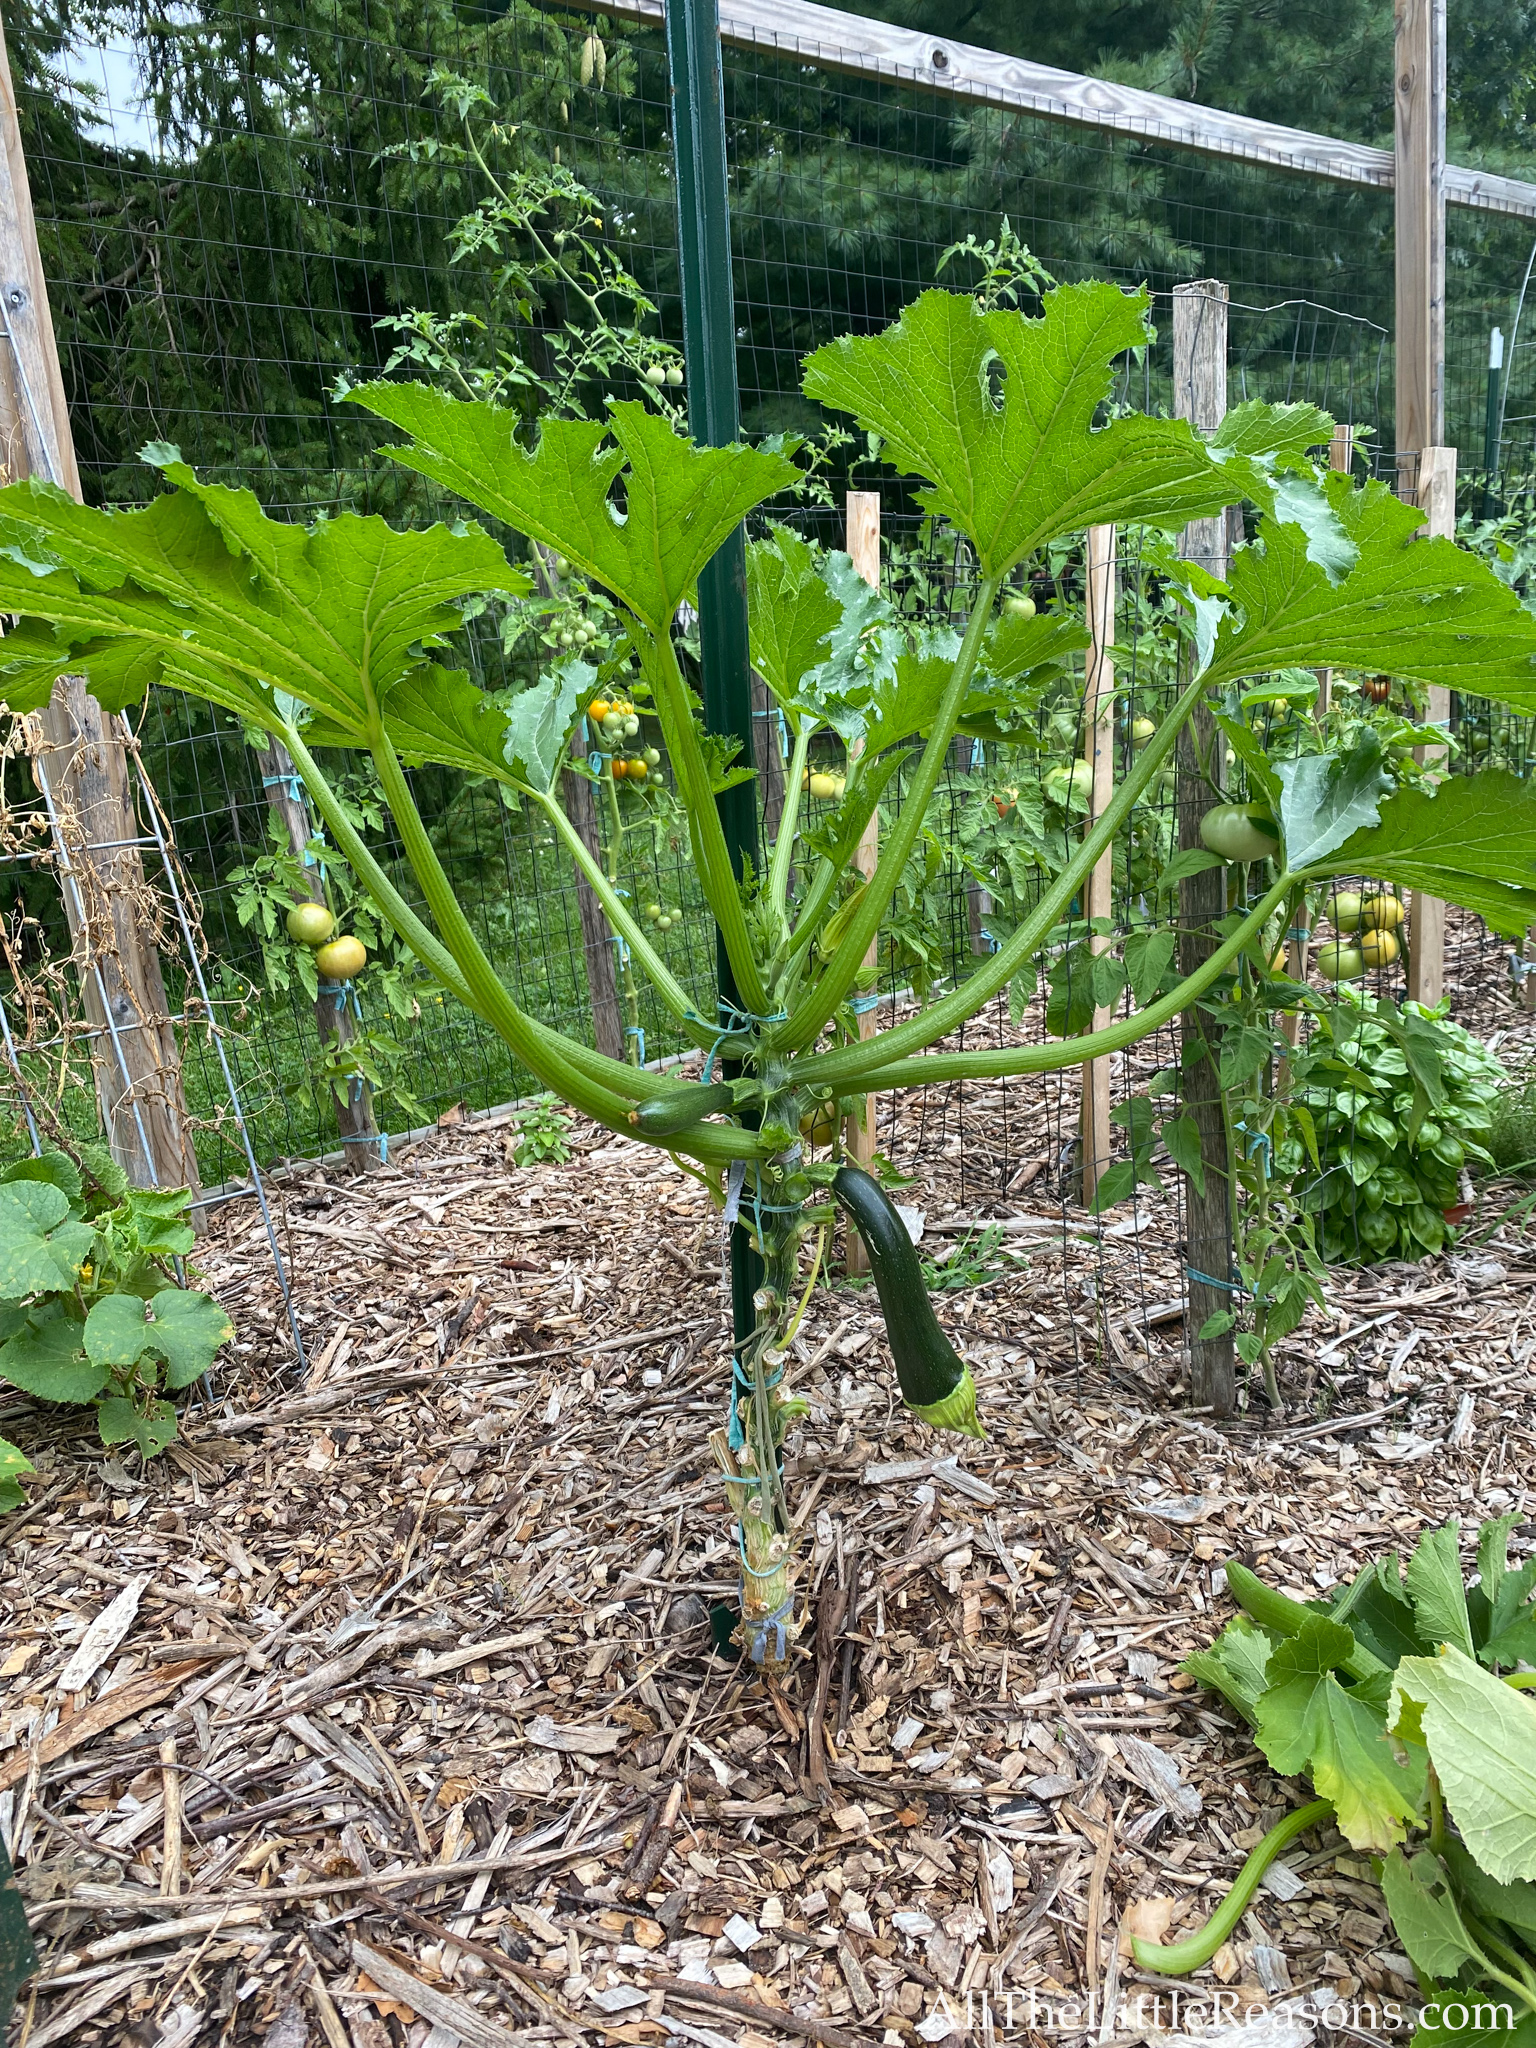 How to Grow Zucchini Vertically